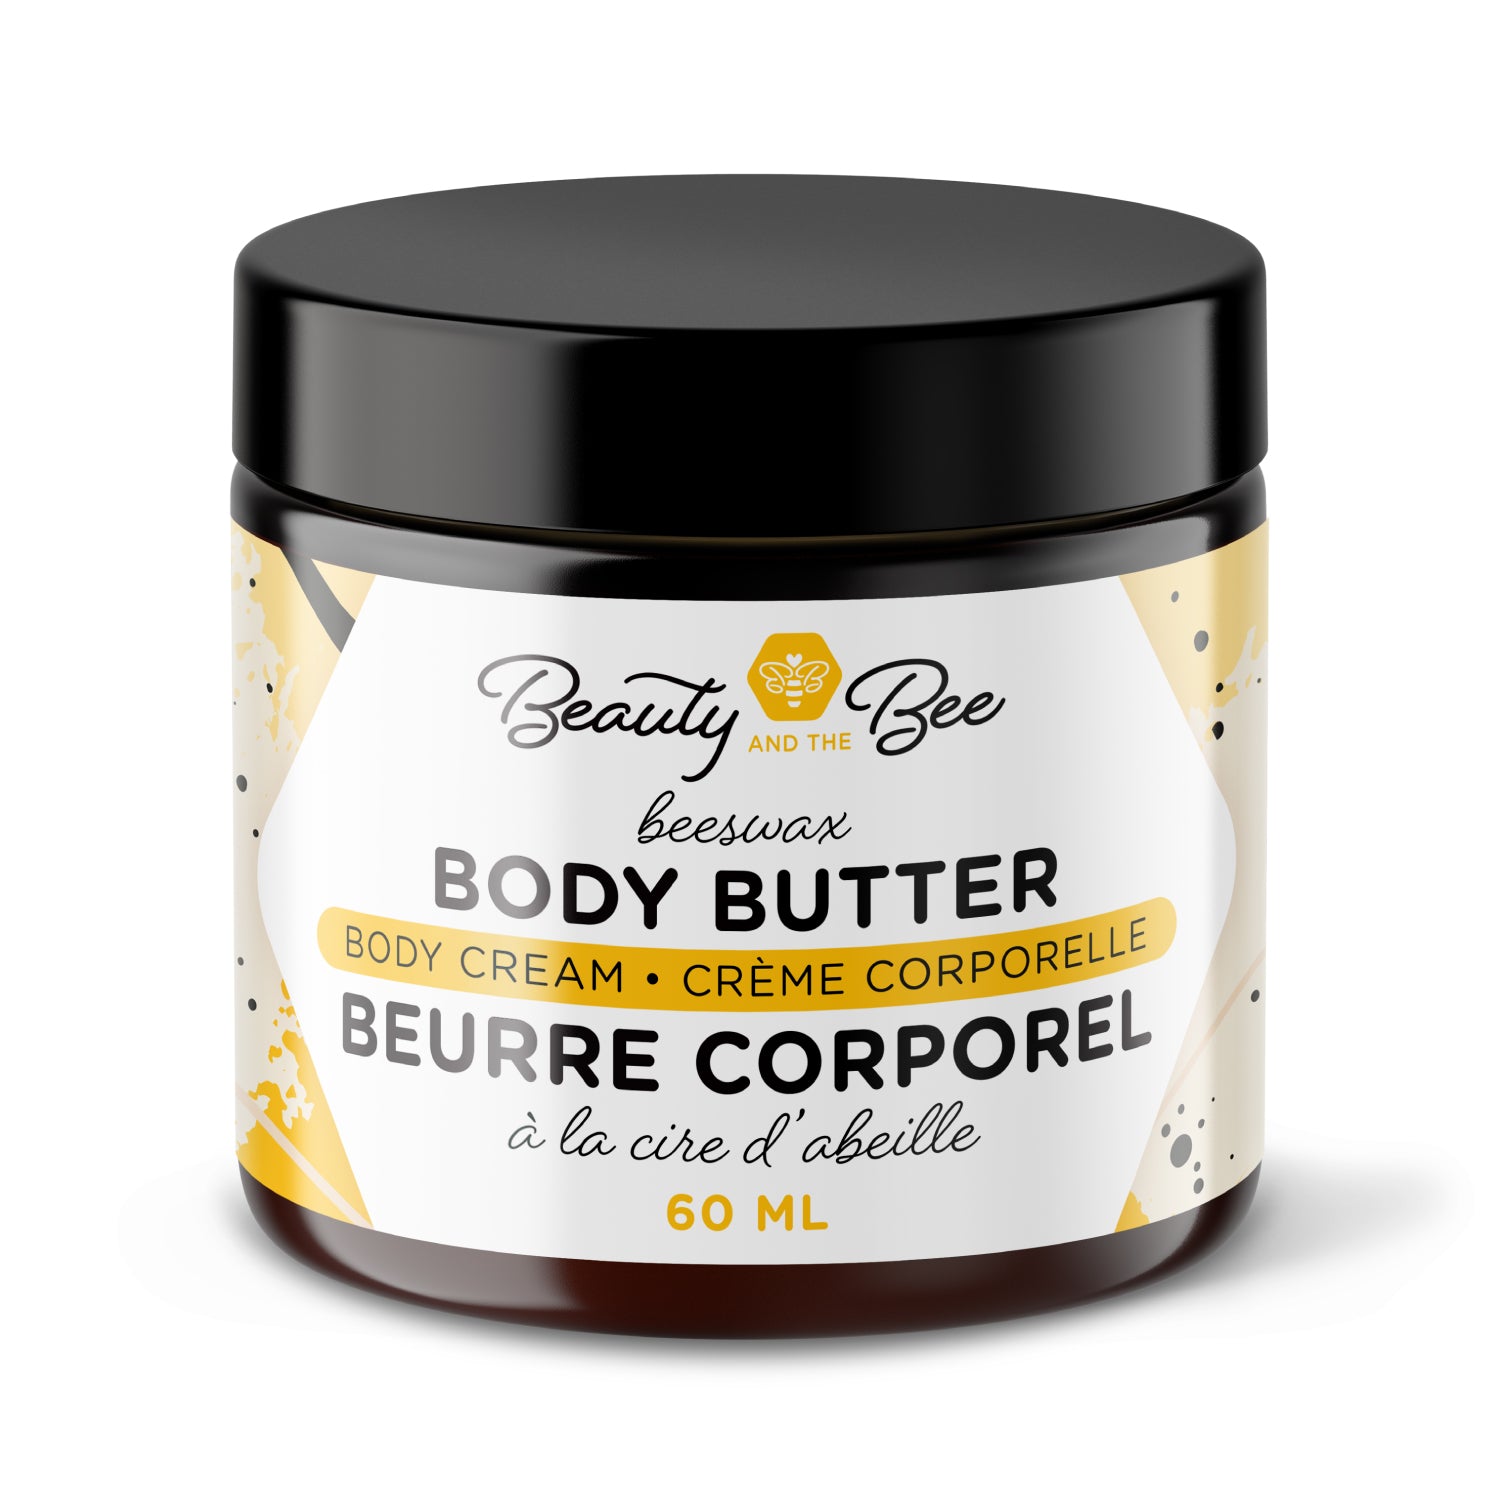 Beauty and the Bee Beeswax Body Butter, Dutchman's Gold